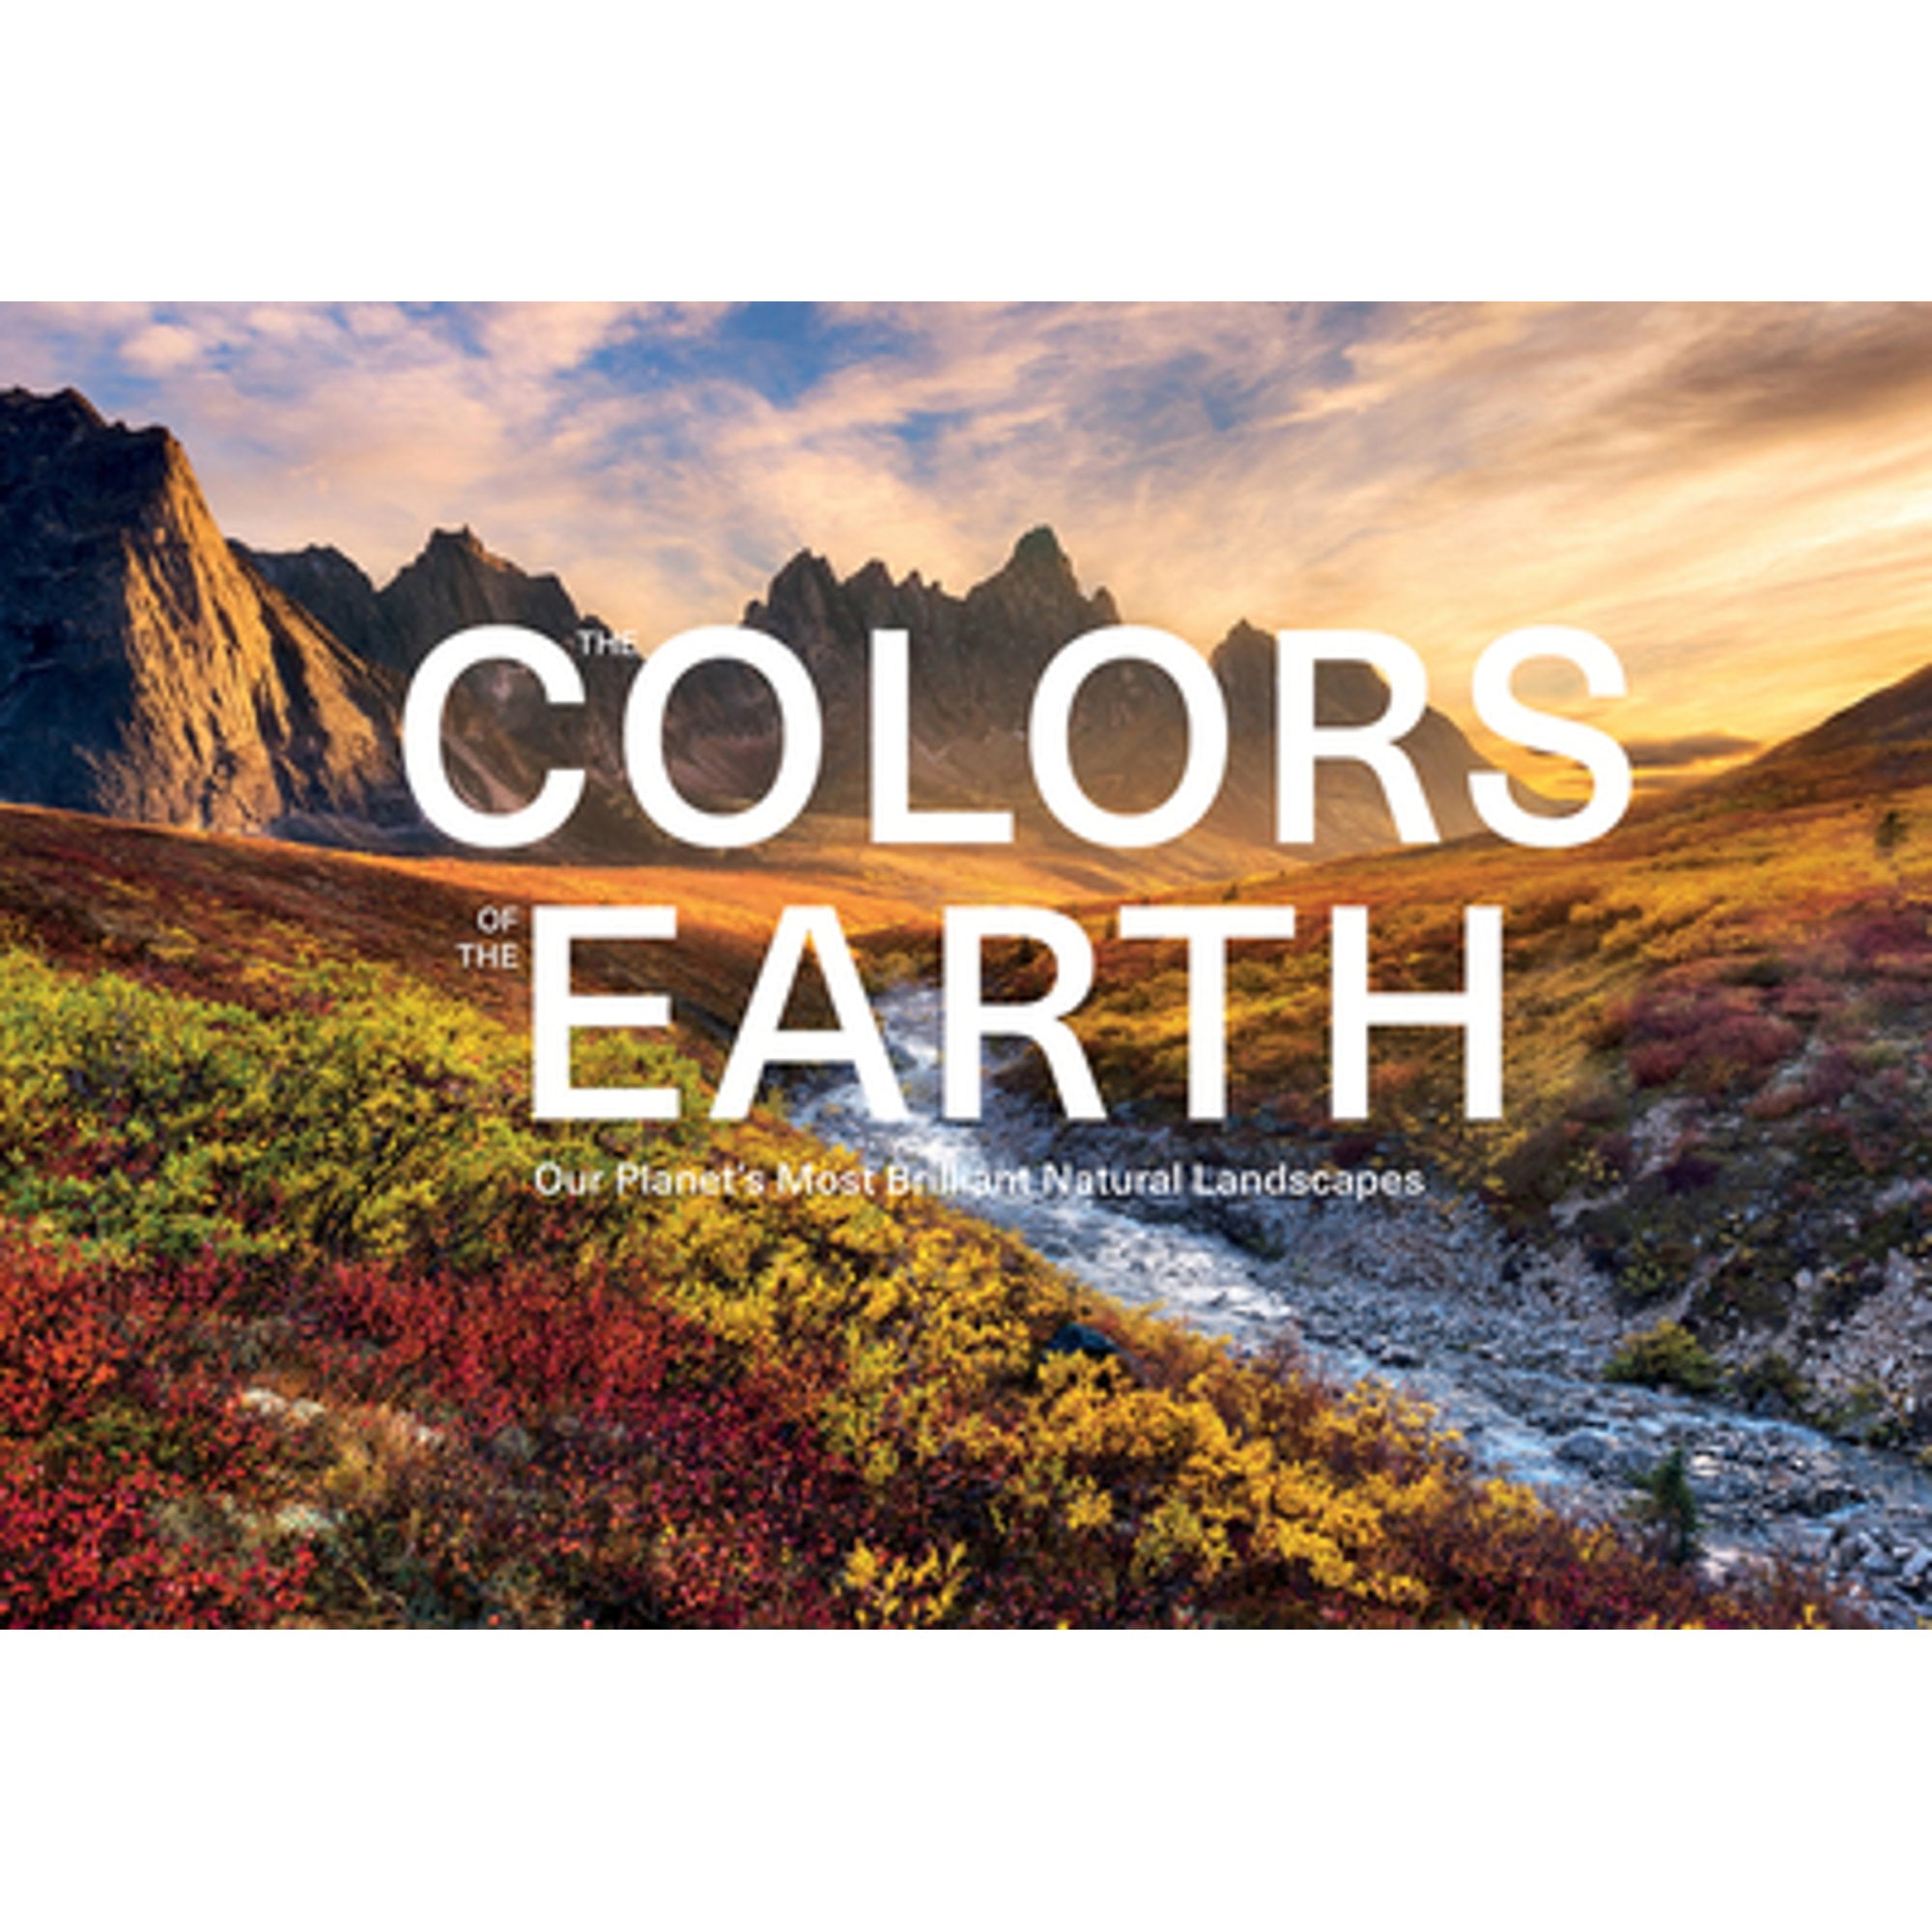 Pre-Owned The Colors of the Earth: Our Planet's Most Brilliant Natural Landscapes (Hardcover) by Anke Benstem, Kai Drfeld, Robert Fischer